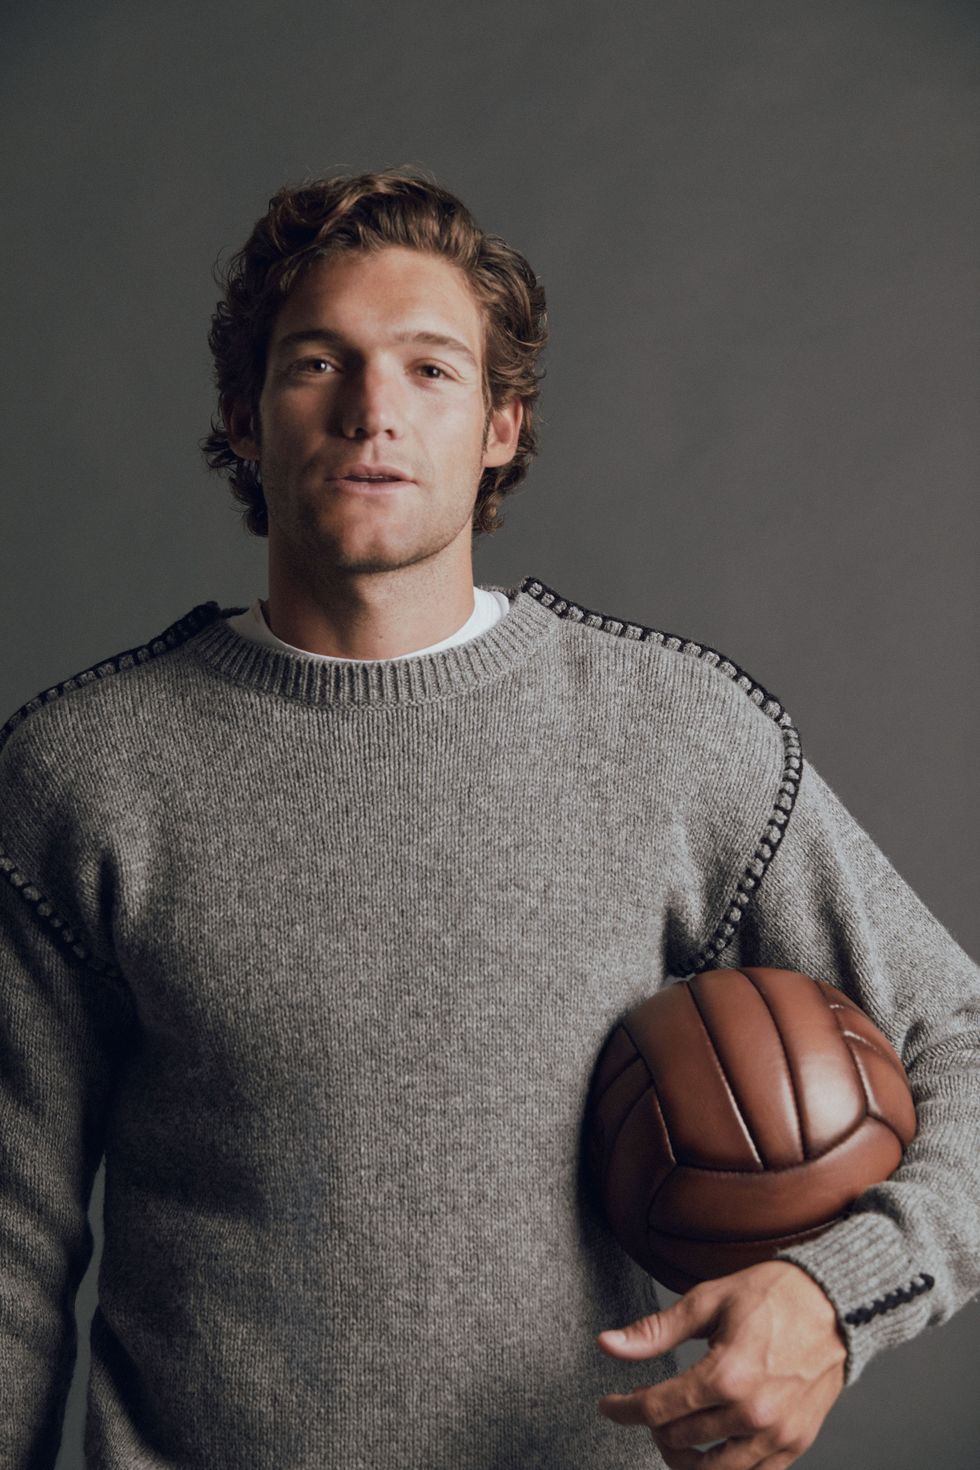 Marcos Alonso Esquire